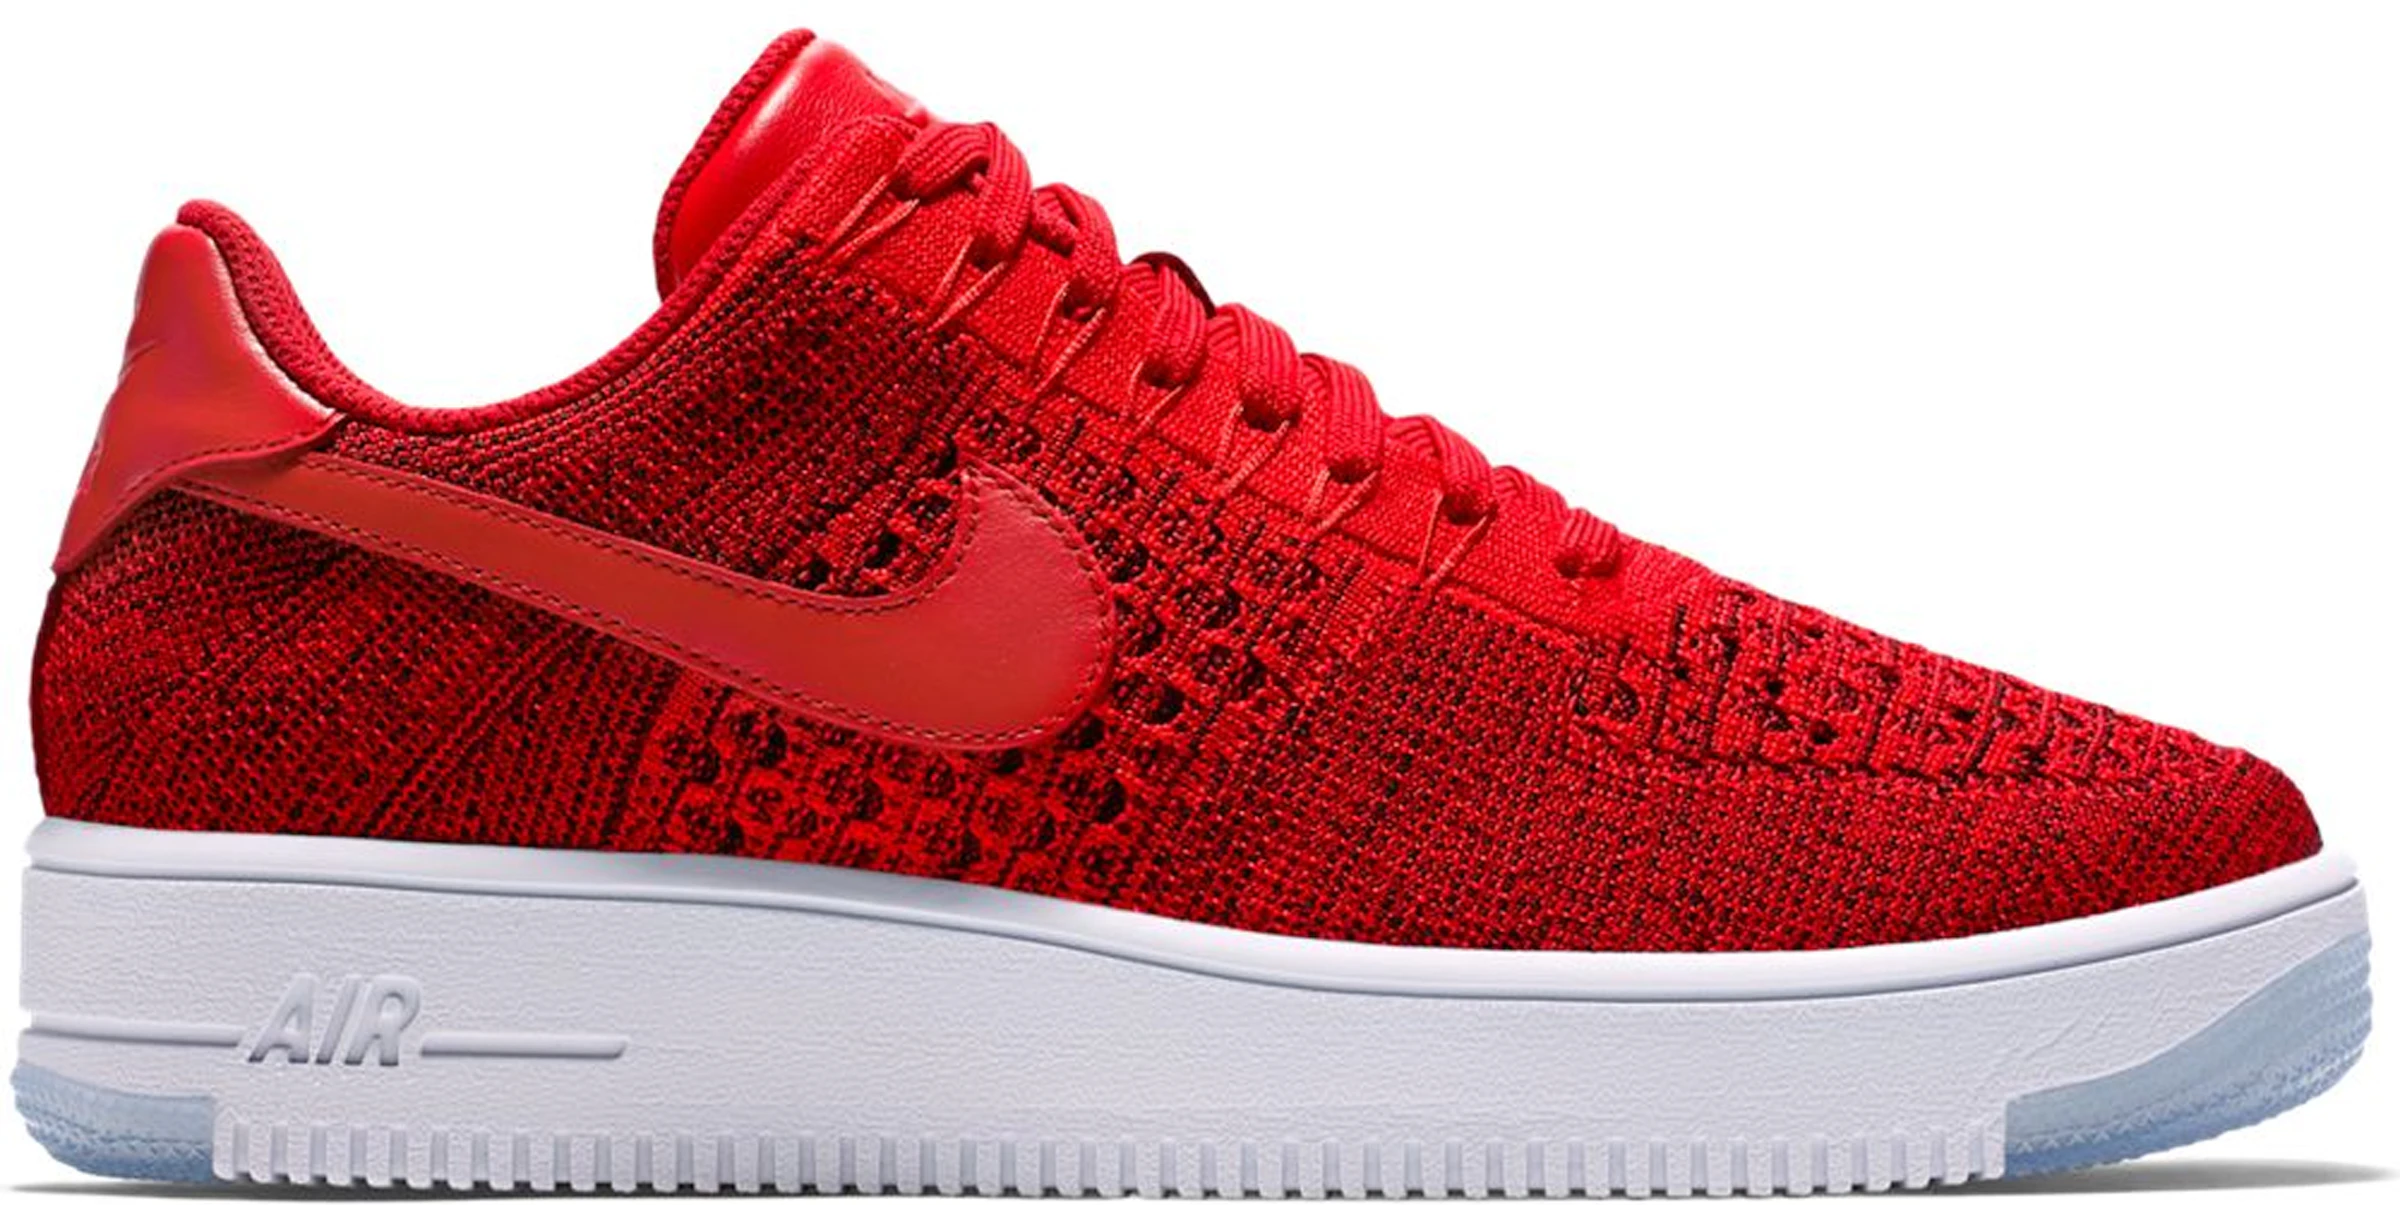 Nike Air Force 1 Ultra Flyknit University Red - 817419-600 -